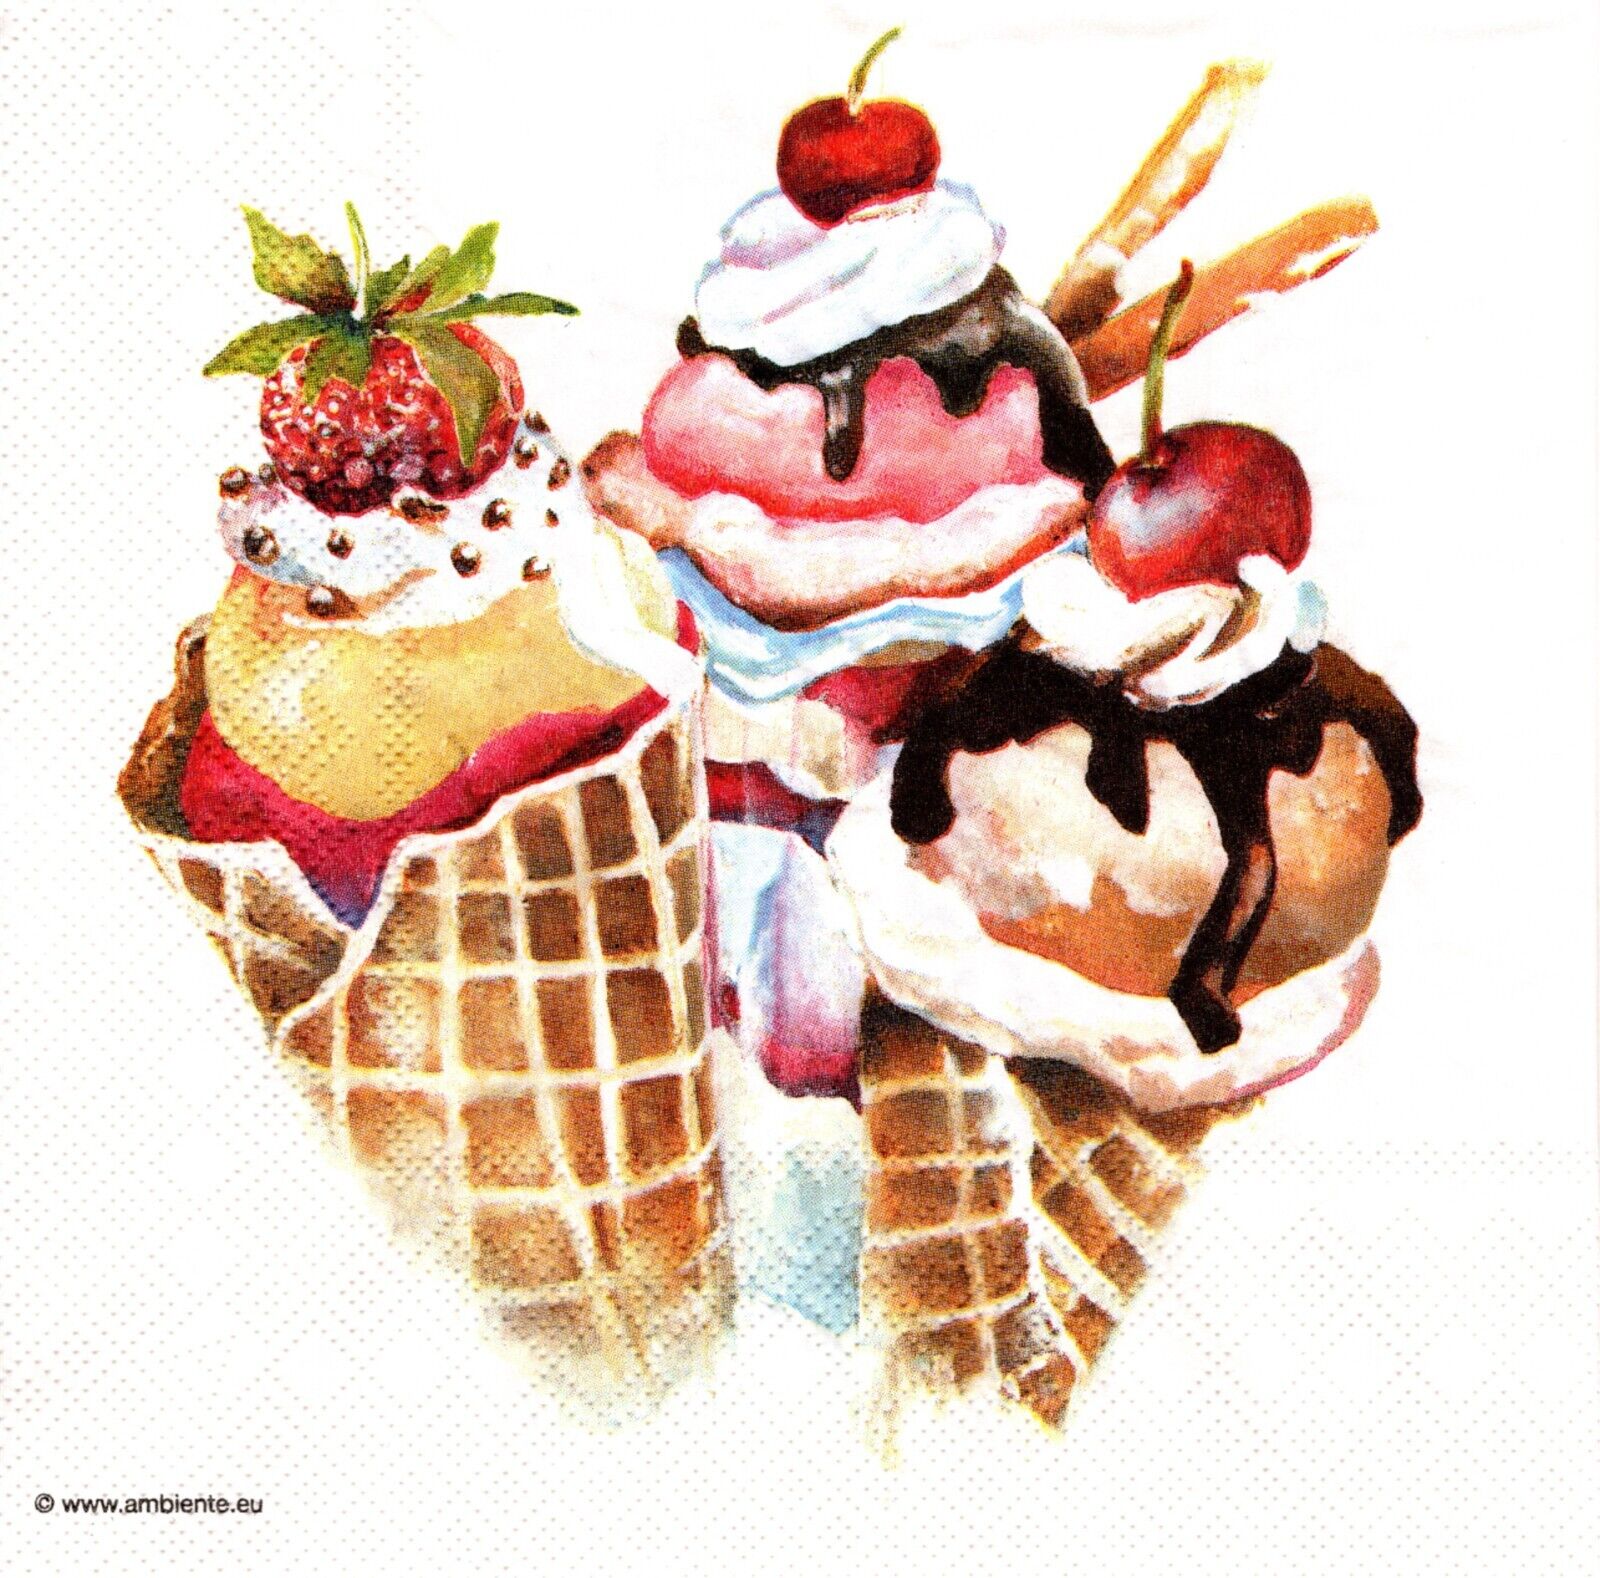 (2) Two Paper Lunch Napkins for Decoupage/Mixed Media - Ice Cream cones food